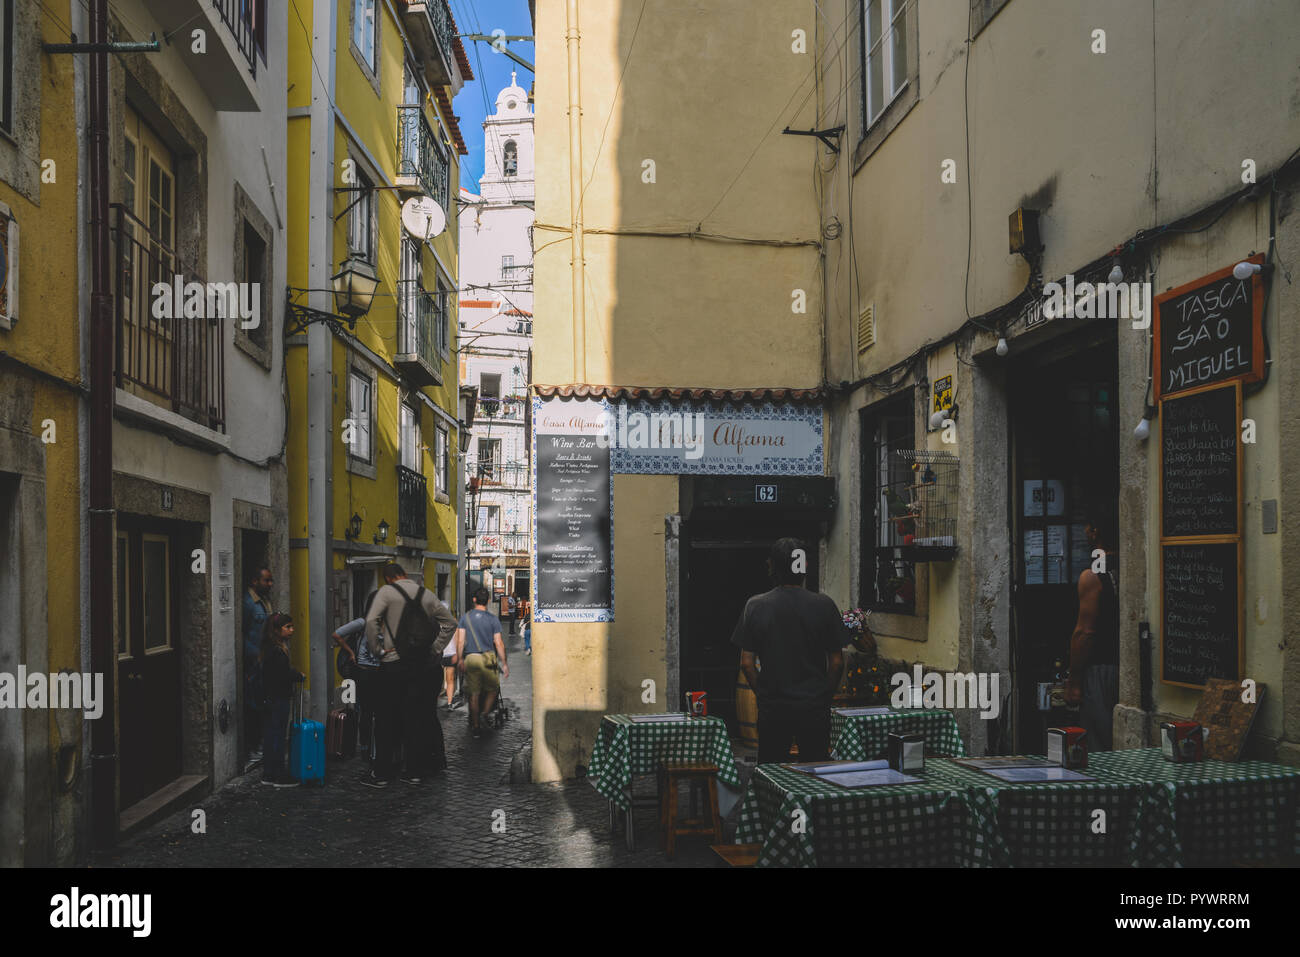 Lisbon, Portugal - Oct 24, 2018: Narrow streets with traditional restaurants in Alfama district of Lisbon with Sao Vicente church in background Stock Photo